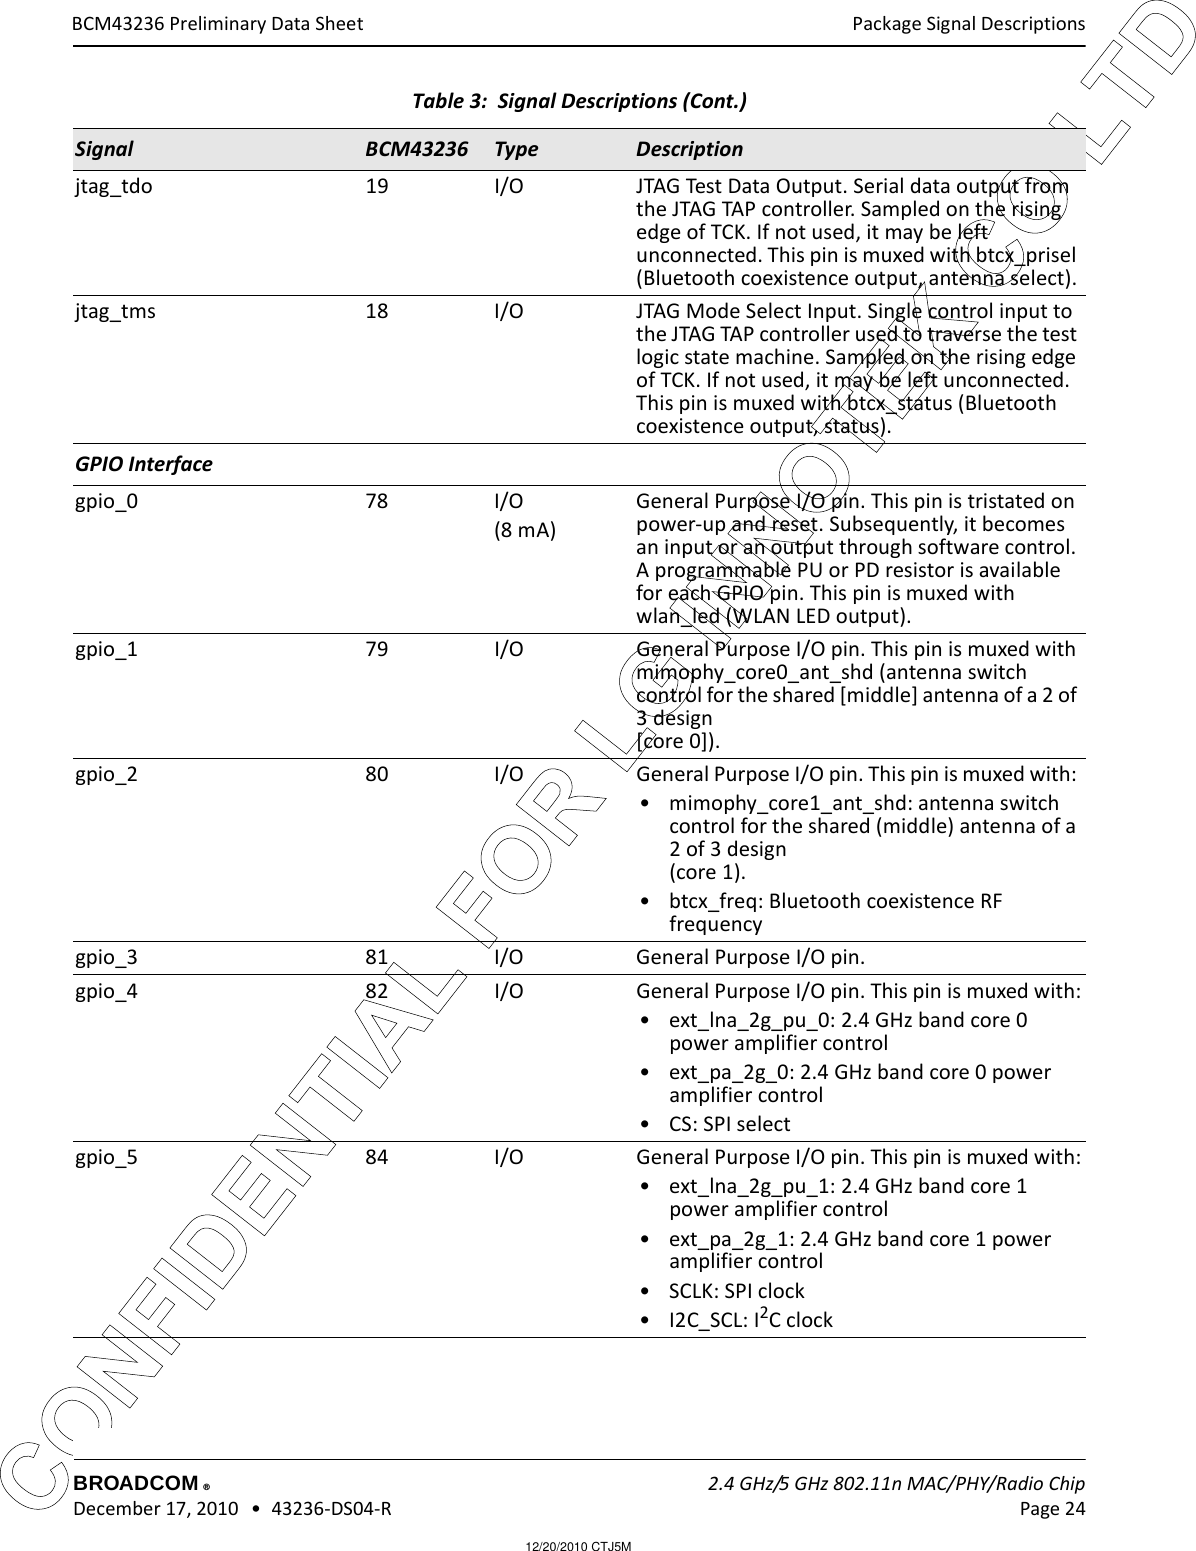 12/20/2010 CTJ5MCONFIDENTIAL FOR LG INNOTEK CO LTD Package Signal DescriptionsBROADCOM    2.4 GHz/5 GHz 802.11n MAC/PHY/Radio Chip December 17, 2010   •  43236-DS04-R Page 24®BCM43236 Preliminary Data Sheetjtag_tdo 19 I/O JTAG Test Data Output. Serial data output from the JTAG TAP controller. Sampled on the rising edge of TCK. If not used, it may be left unconnected. This pin is muxed with btcx_prisel (Bluetooth coexistence output, antenna select).jtag_tms 18 I/O JTAG Mode Select Input. Single control input to the JTAG TAP controller used to traverse the test logic state machine. Sampled on the rising edge of TCK. If not used, it may be left unconnected. This pin is muxed with btcx_status (Bluetooth coexistence output, status).GPIO Interfacegpio_0 78 I/O (8 mA)General Purpose I/O pin. This pin is tristated on power-up and reset. Subsequently, it becomes an input or an output through software control. A programmable PU or PD resistor is available for each GPIO pin. This pin is muxed with wlan_led (WLAN LED output).gpio_1 79 I/O General Purpose I/O pin. This pin is muxed with mimophy_core0_ant_shd (antenna switch control for the shared [middle] antenna of a 2 of 3 design  [core 0]).gpio_2 80 I/O General Purpose I/O pin. This pin is muxed with: • mimophy_core1_ant_shd: antenna switch control for the shared (middle) antenna of a 2 of 3 design  (core 1).• btcx_freq: Bluetooth coexistence RF frequencygpio_3 81 I/O General Purpose I/O pin.gpio_4 82 I/O General Purpose I/O pin. This pin is muxed with:• ext_lna_2g_pu_0: 2.4 GHz band core 0 power amplifier control• ext_pa_2g_0: 2.4 GHz band core 0 power amplifier control• CS: SPI selectgpio_5 84 I/O General Purpose I/O pin. This pin is muxed with:• ext_lna_2g_pu_1: 2.4 GHz band core 1 power amplifier control• ext_pa_2g_1: 2.4 GHz band core 1 power amplifier control•SCLK: SPI clock•I2C_SCL: I2C clockTable 3:  Signal Descriptions (Cont.)Signal BCM43236 Type Description